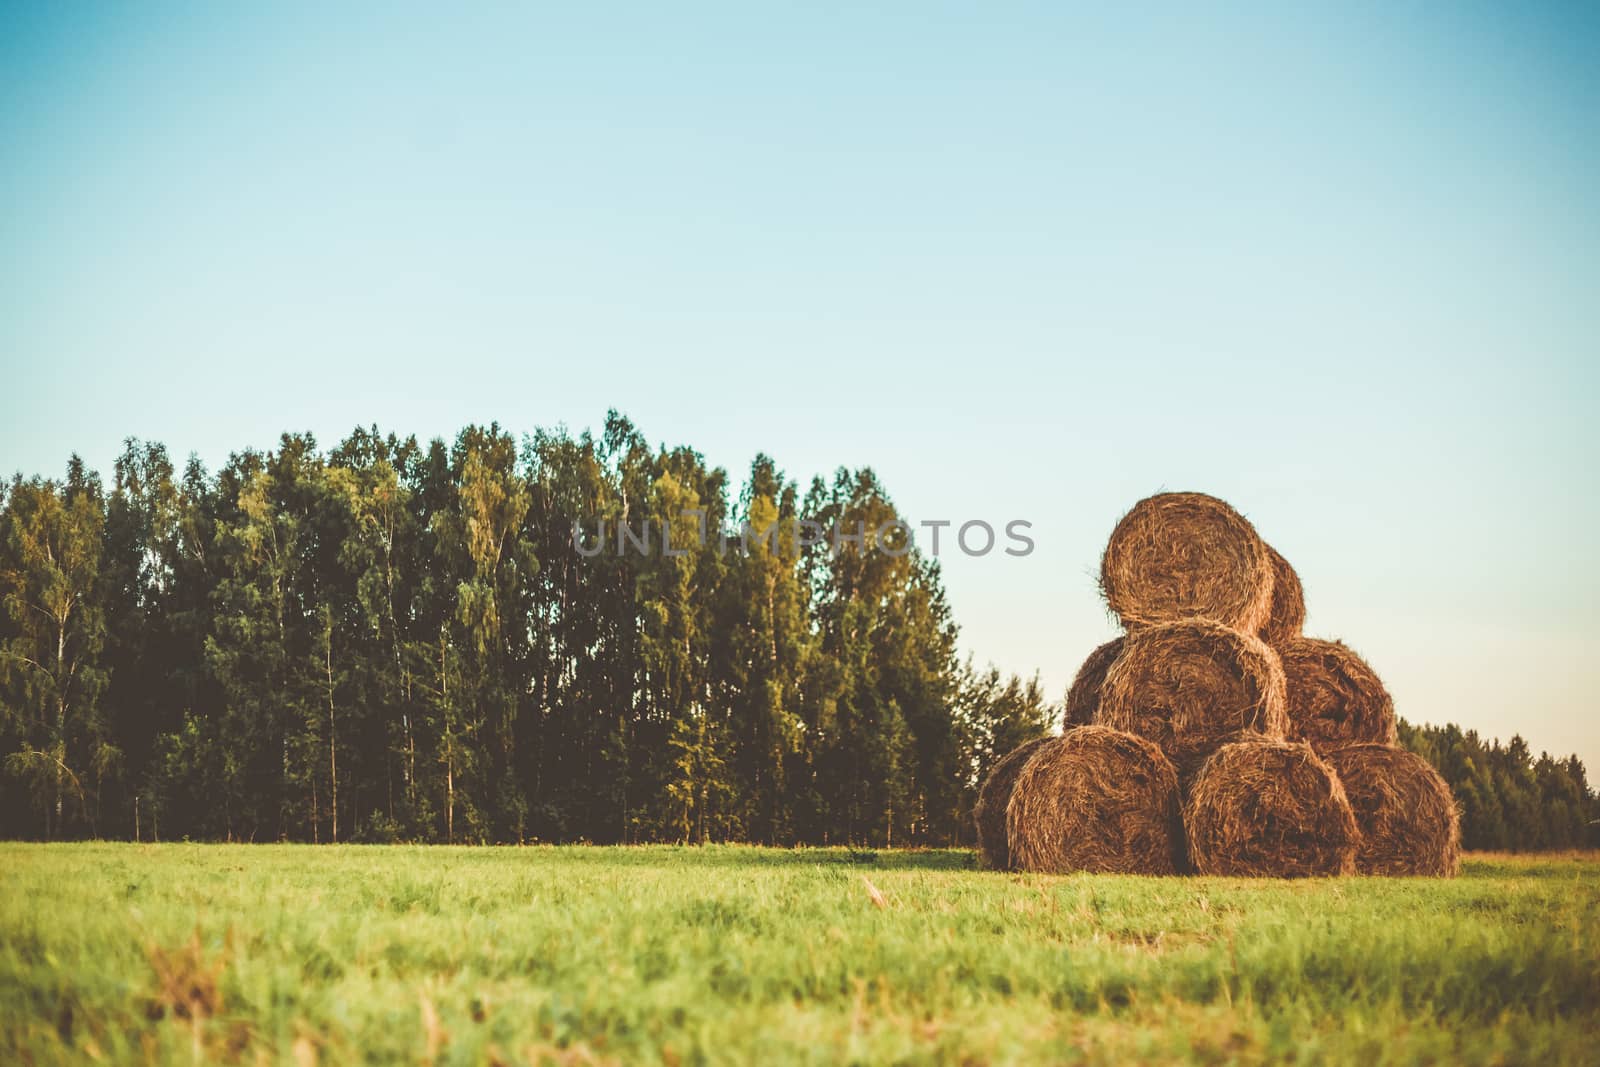 Bales of hay on a field with forest in the background